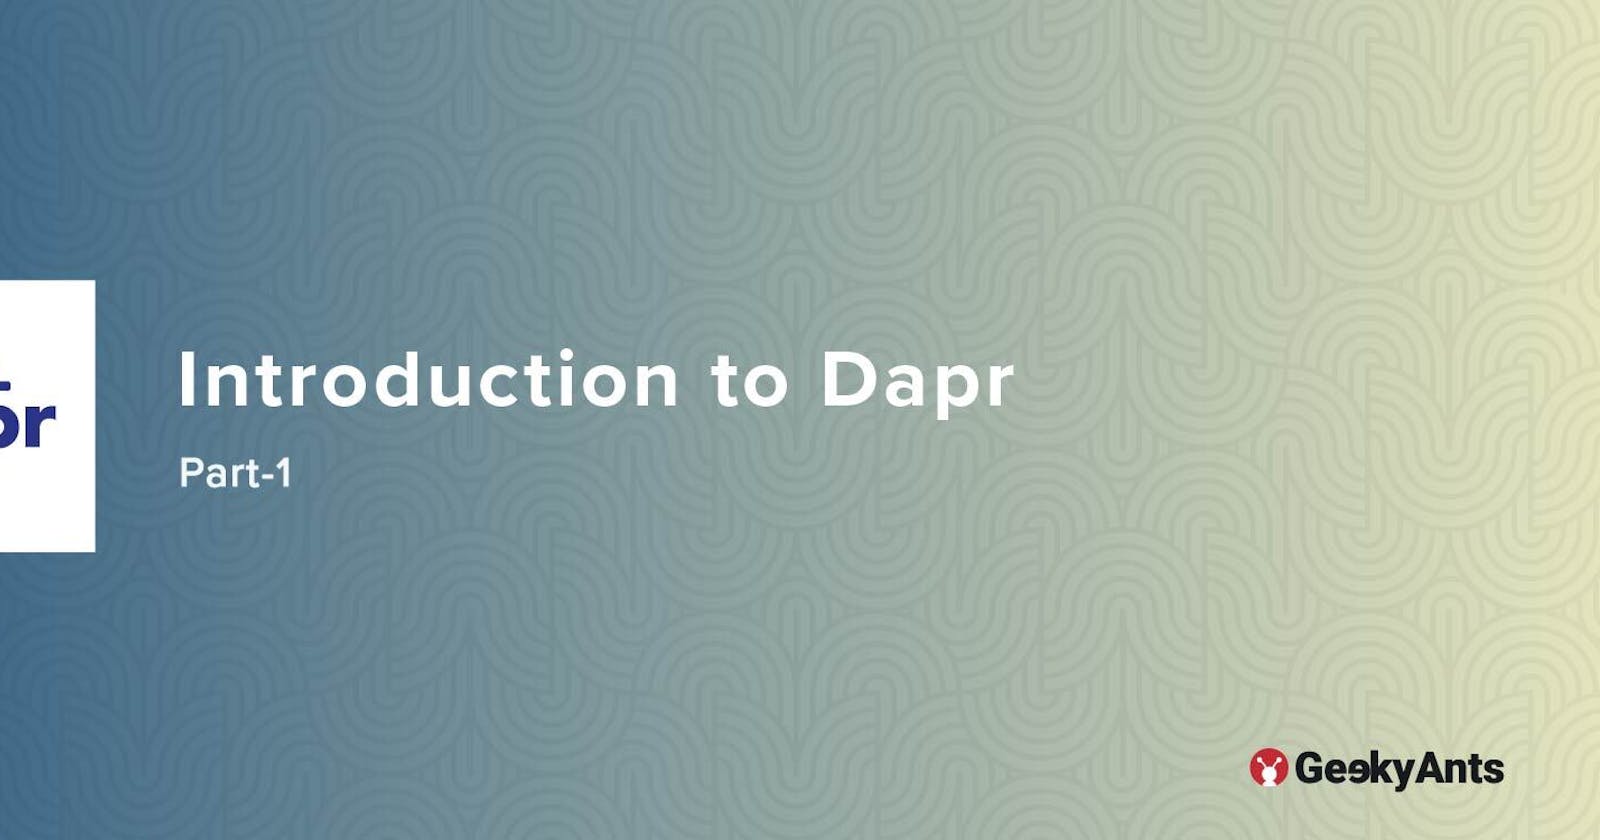 Introduction to Dapr Part-1